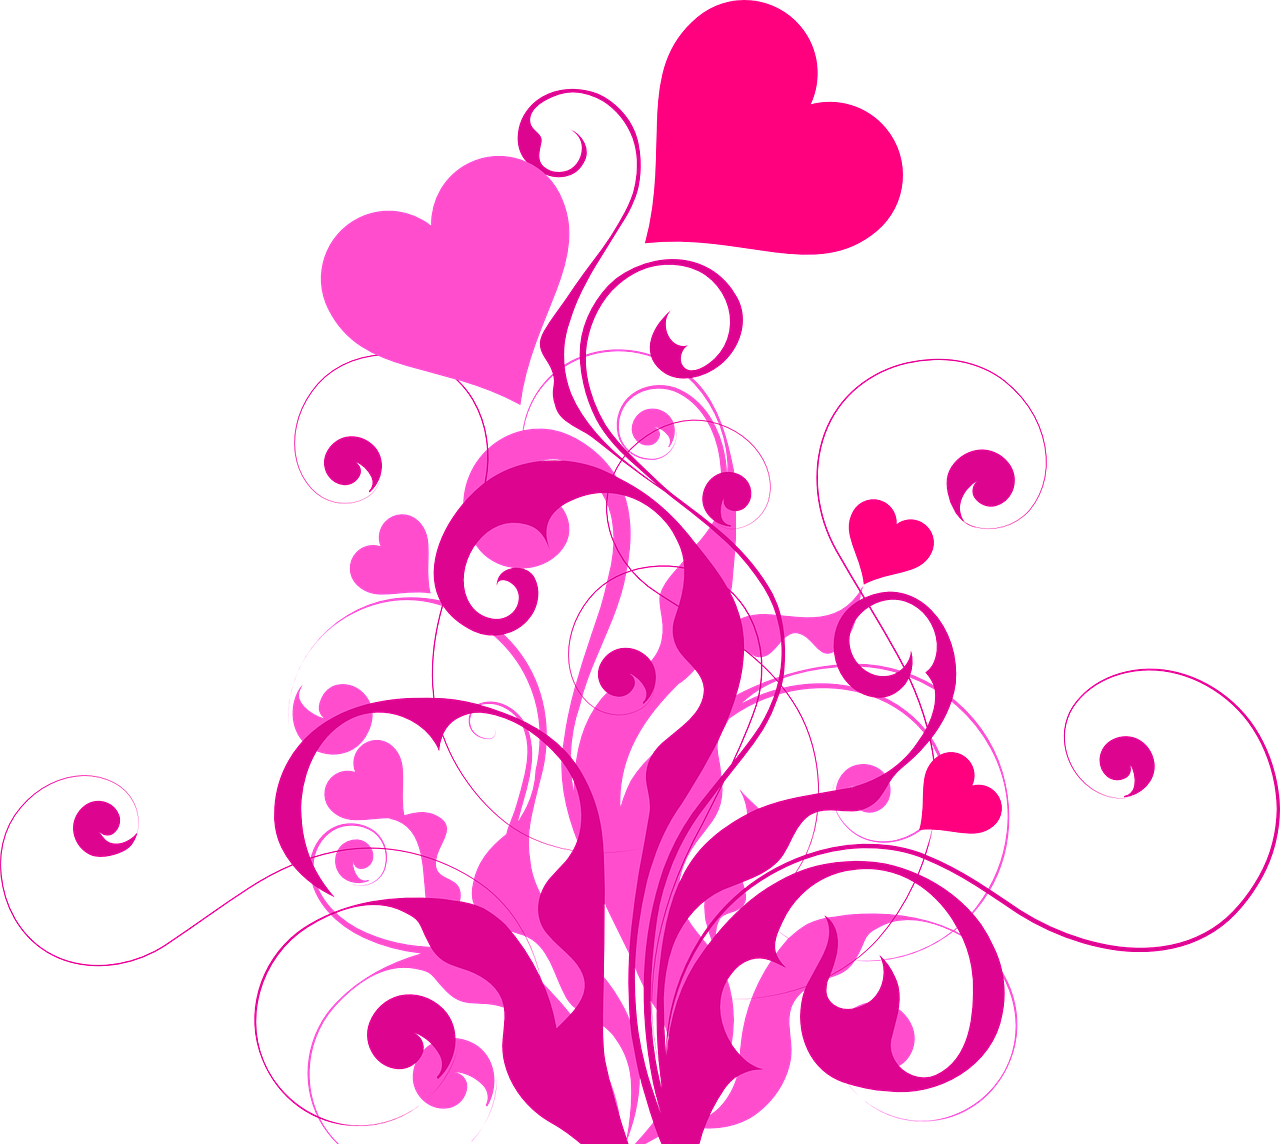 a bunch of pink hearts on a black background, vector art, flickr, romanticism, electric vines and swirls, floral growth, by :5 sexy: 7, ornate flower design